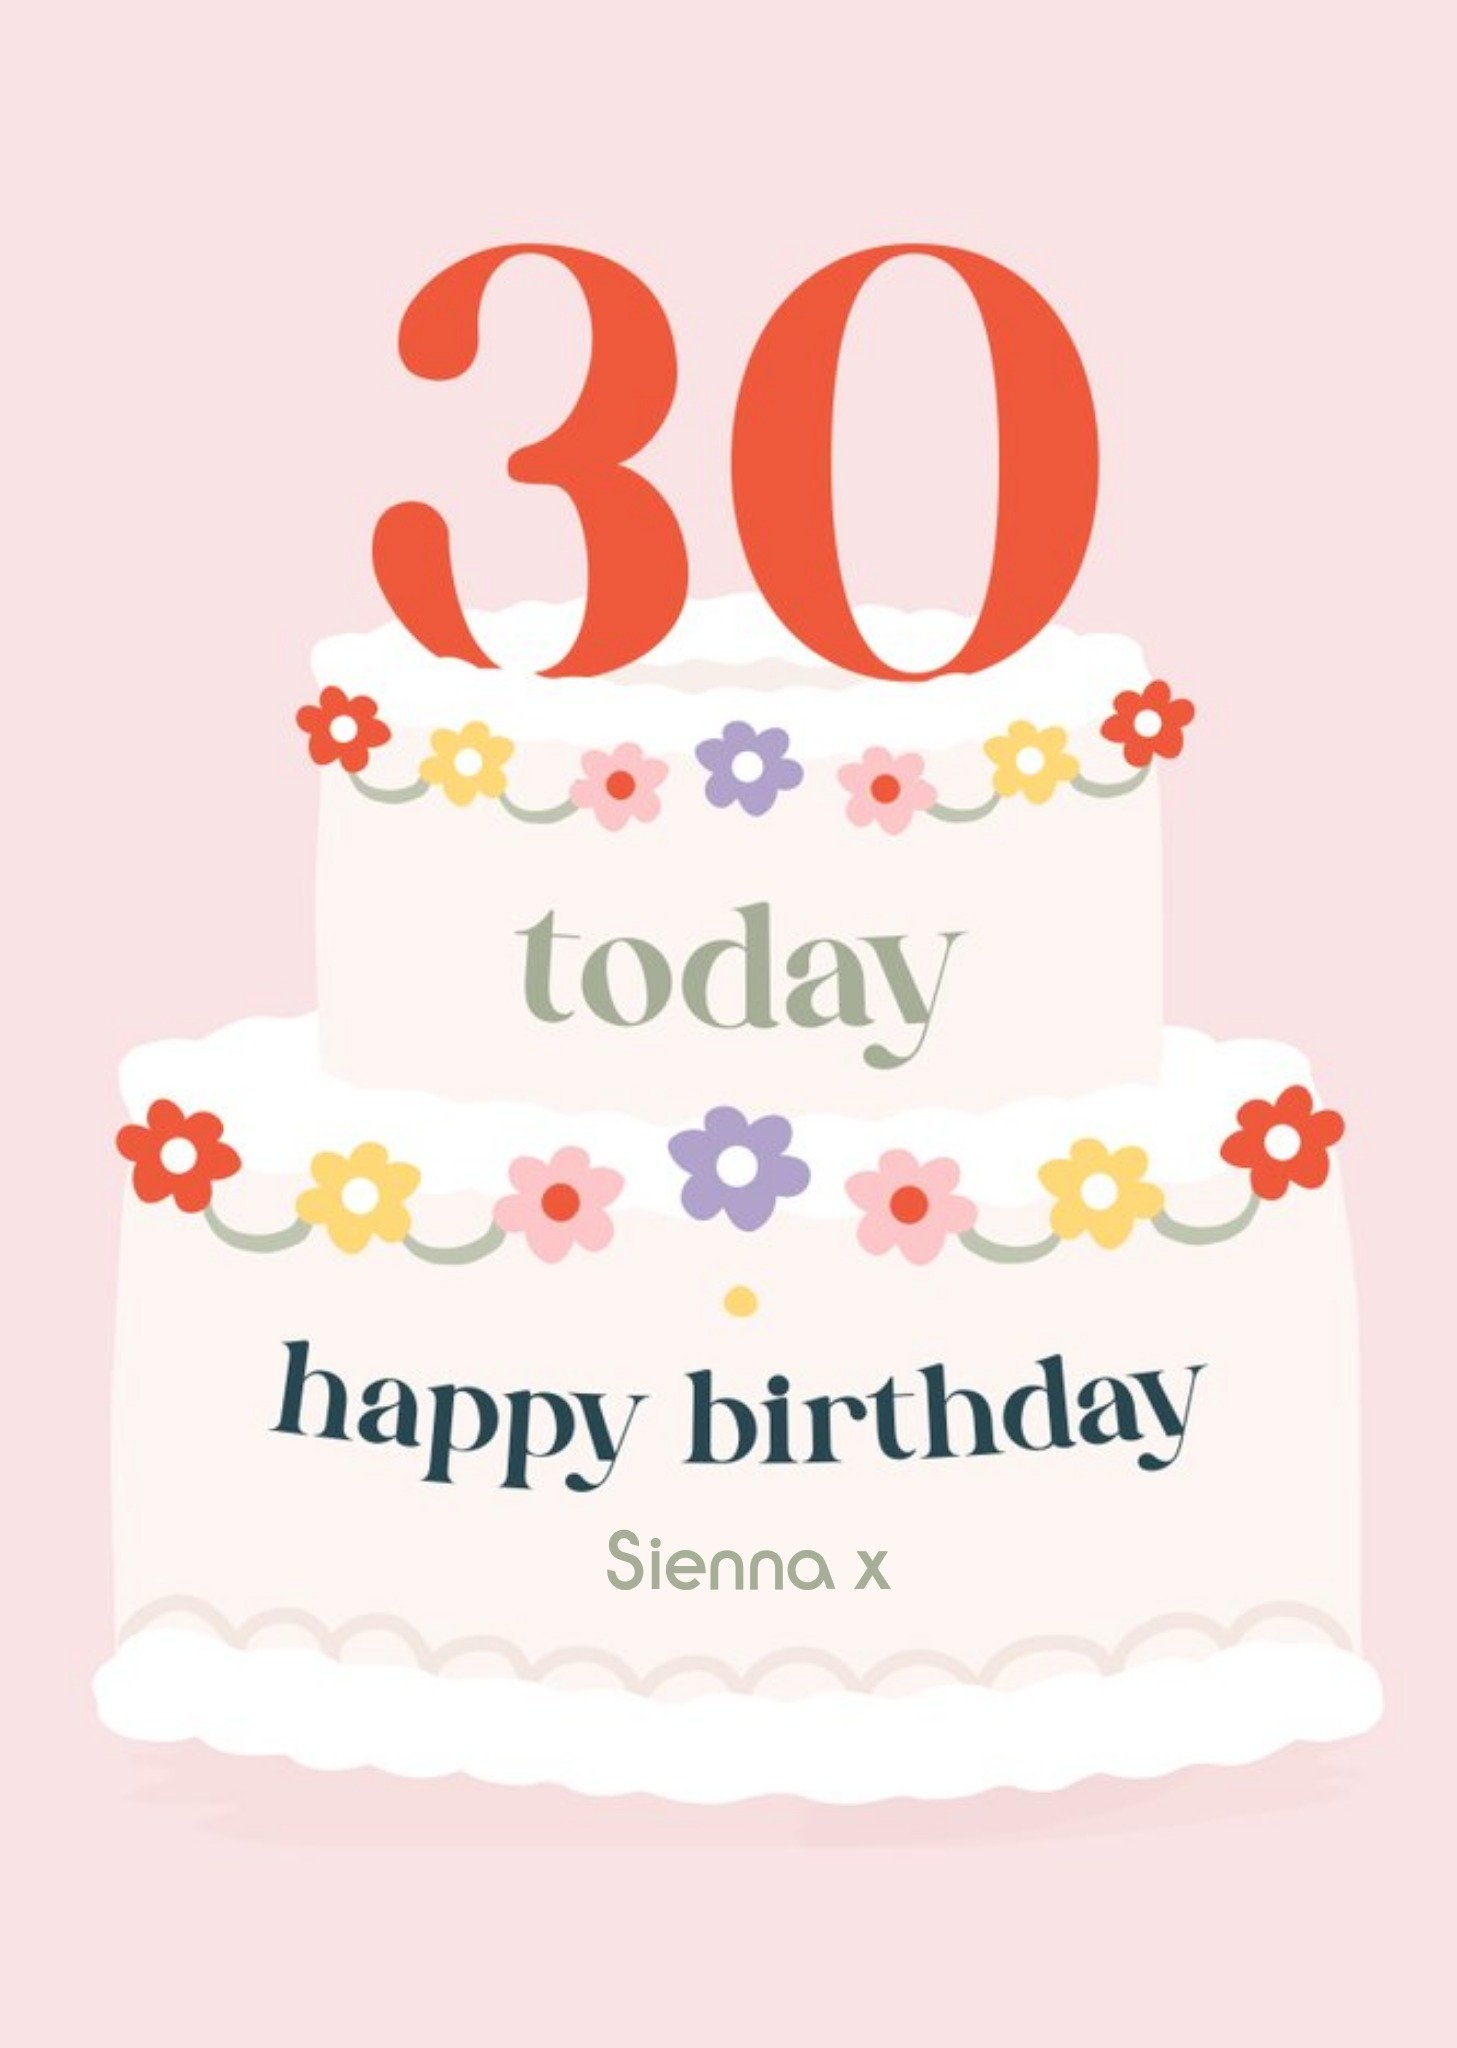 Moonpig Simple Illustration Of A 30th Birthday Cake 30 Today Happy Birthday Card, Large